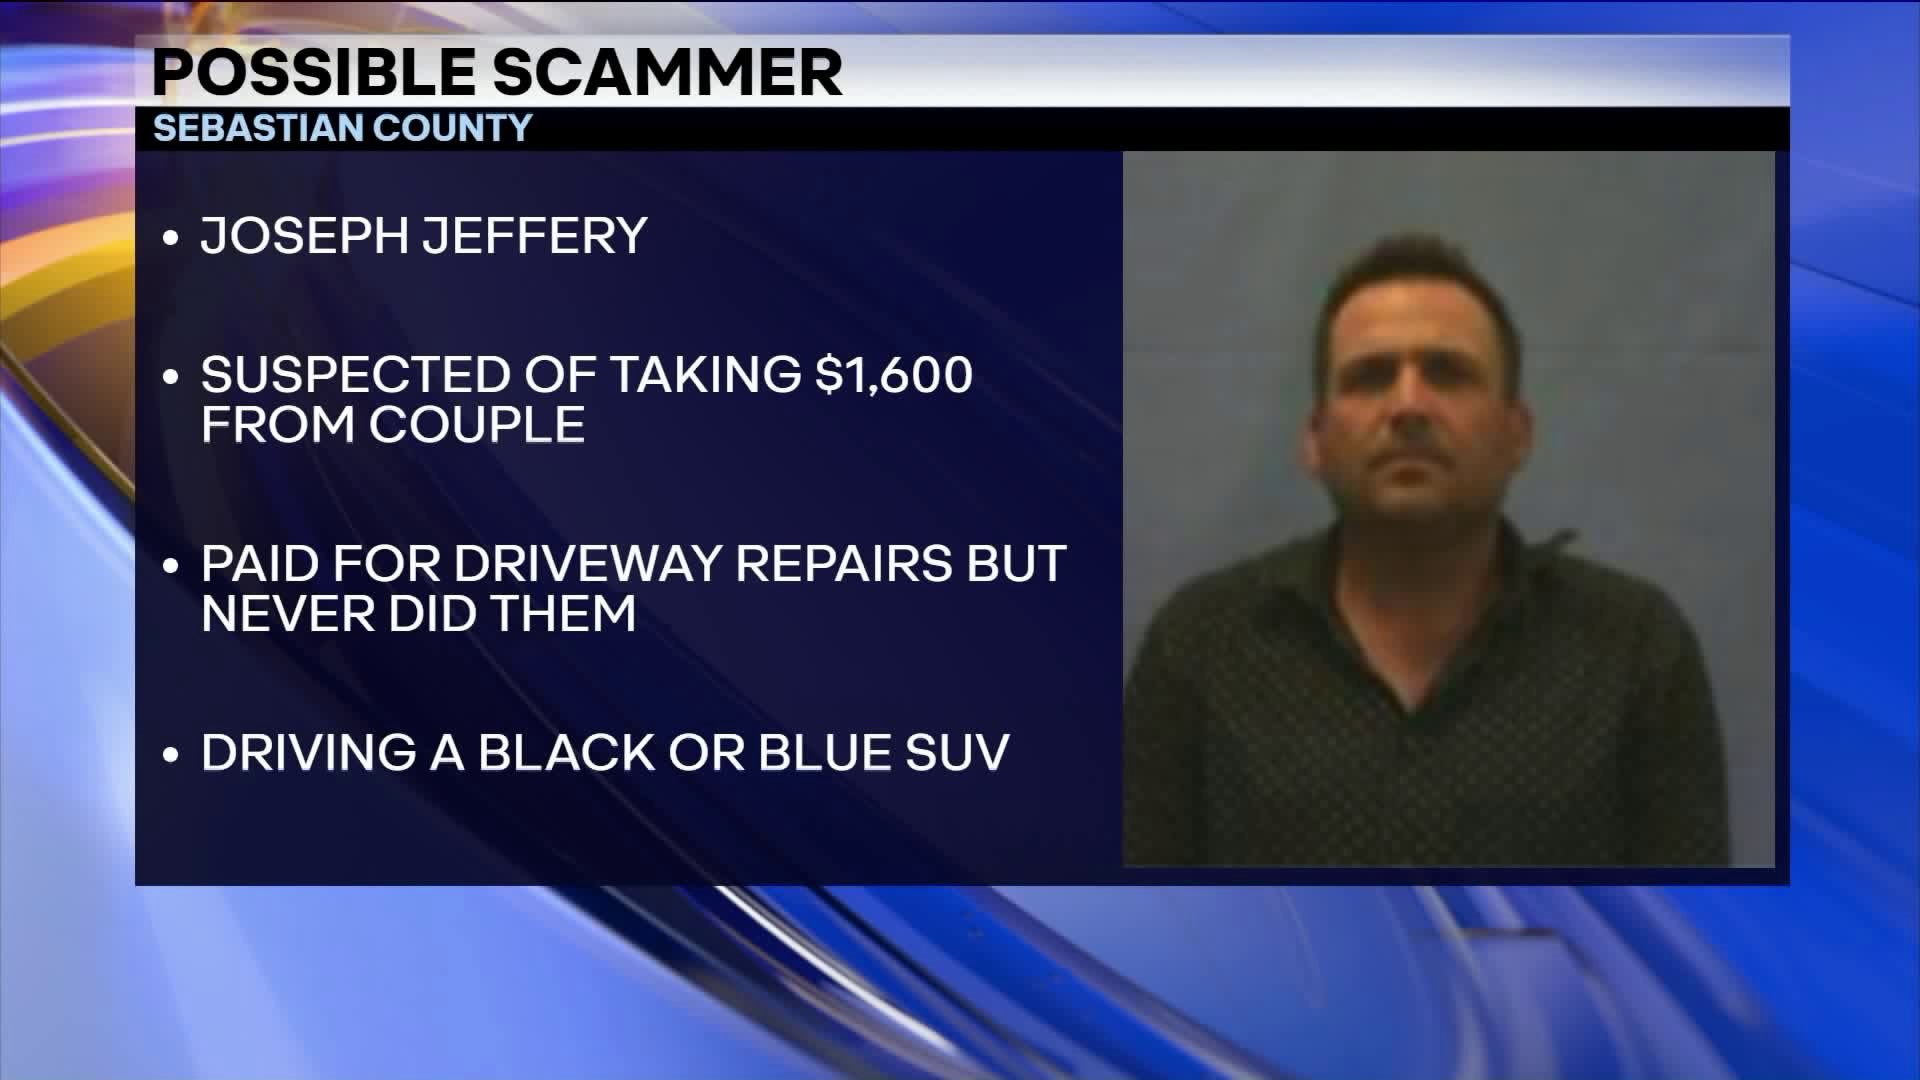 Police Looking For Possible Scammer In Sebastian County